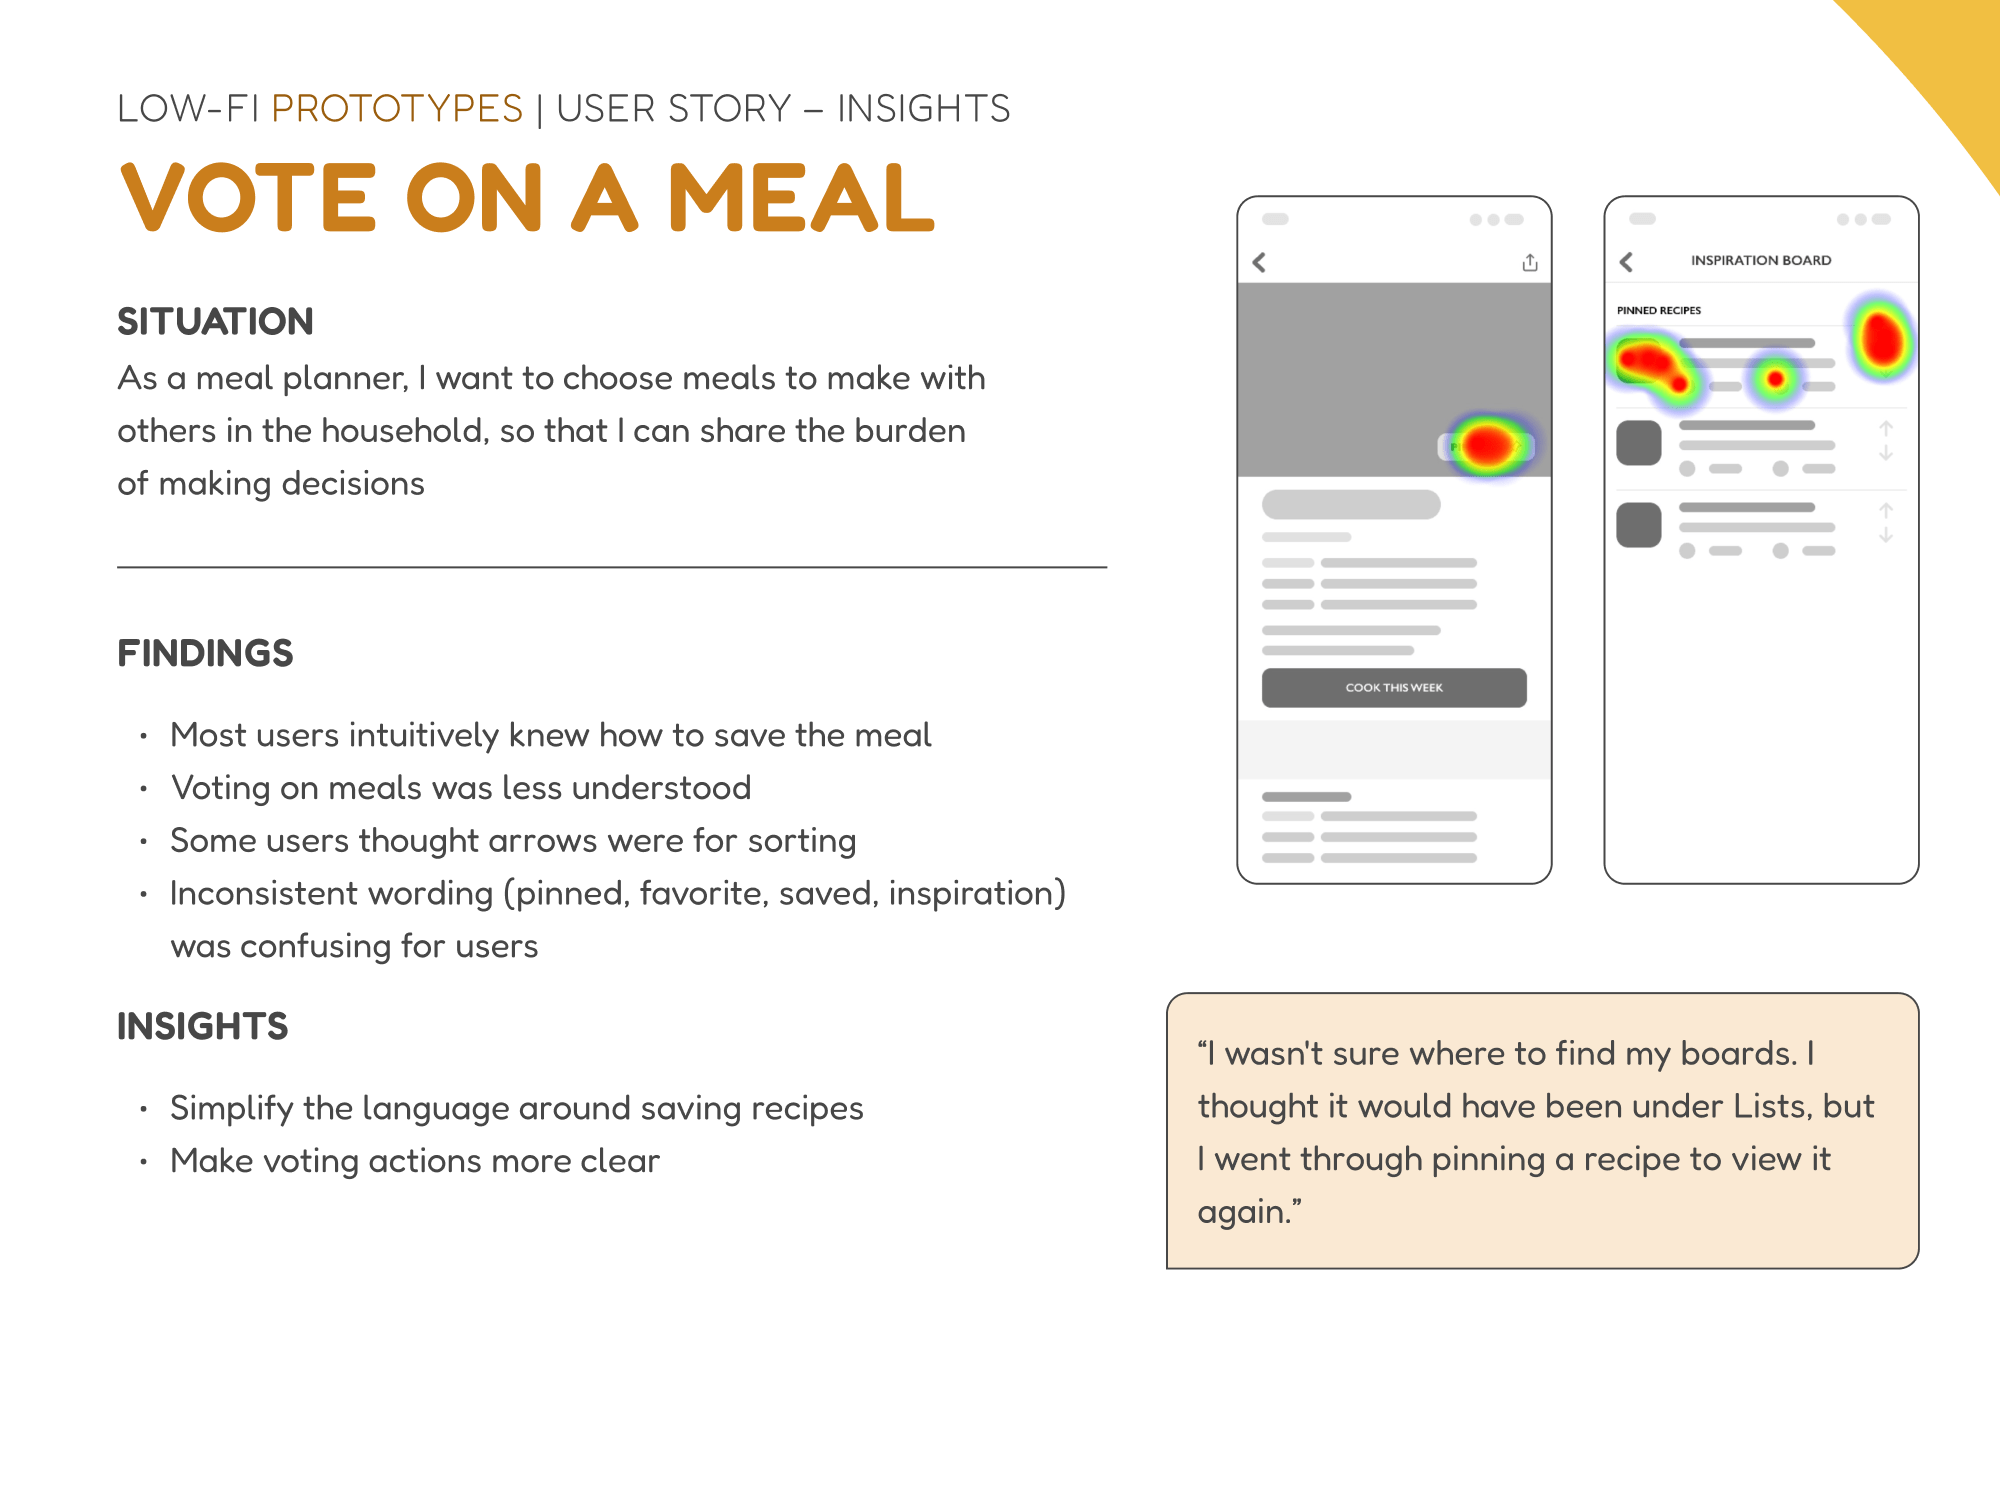 Insights for the meal planner to vote on a meal. Users didn't understand the inconsistent terminology.